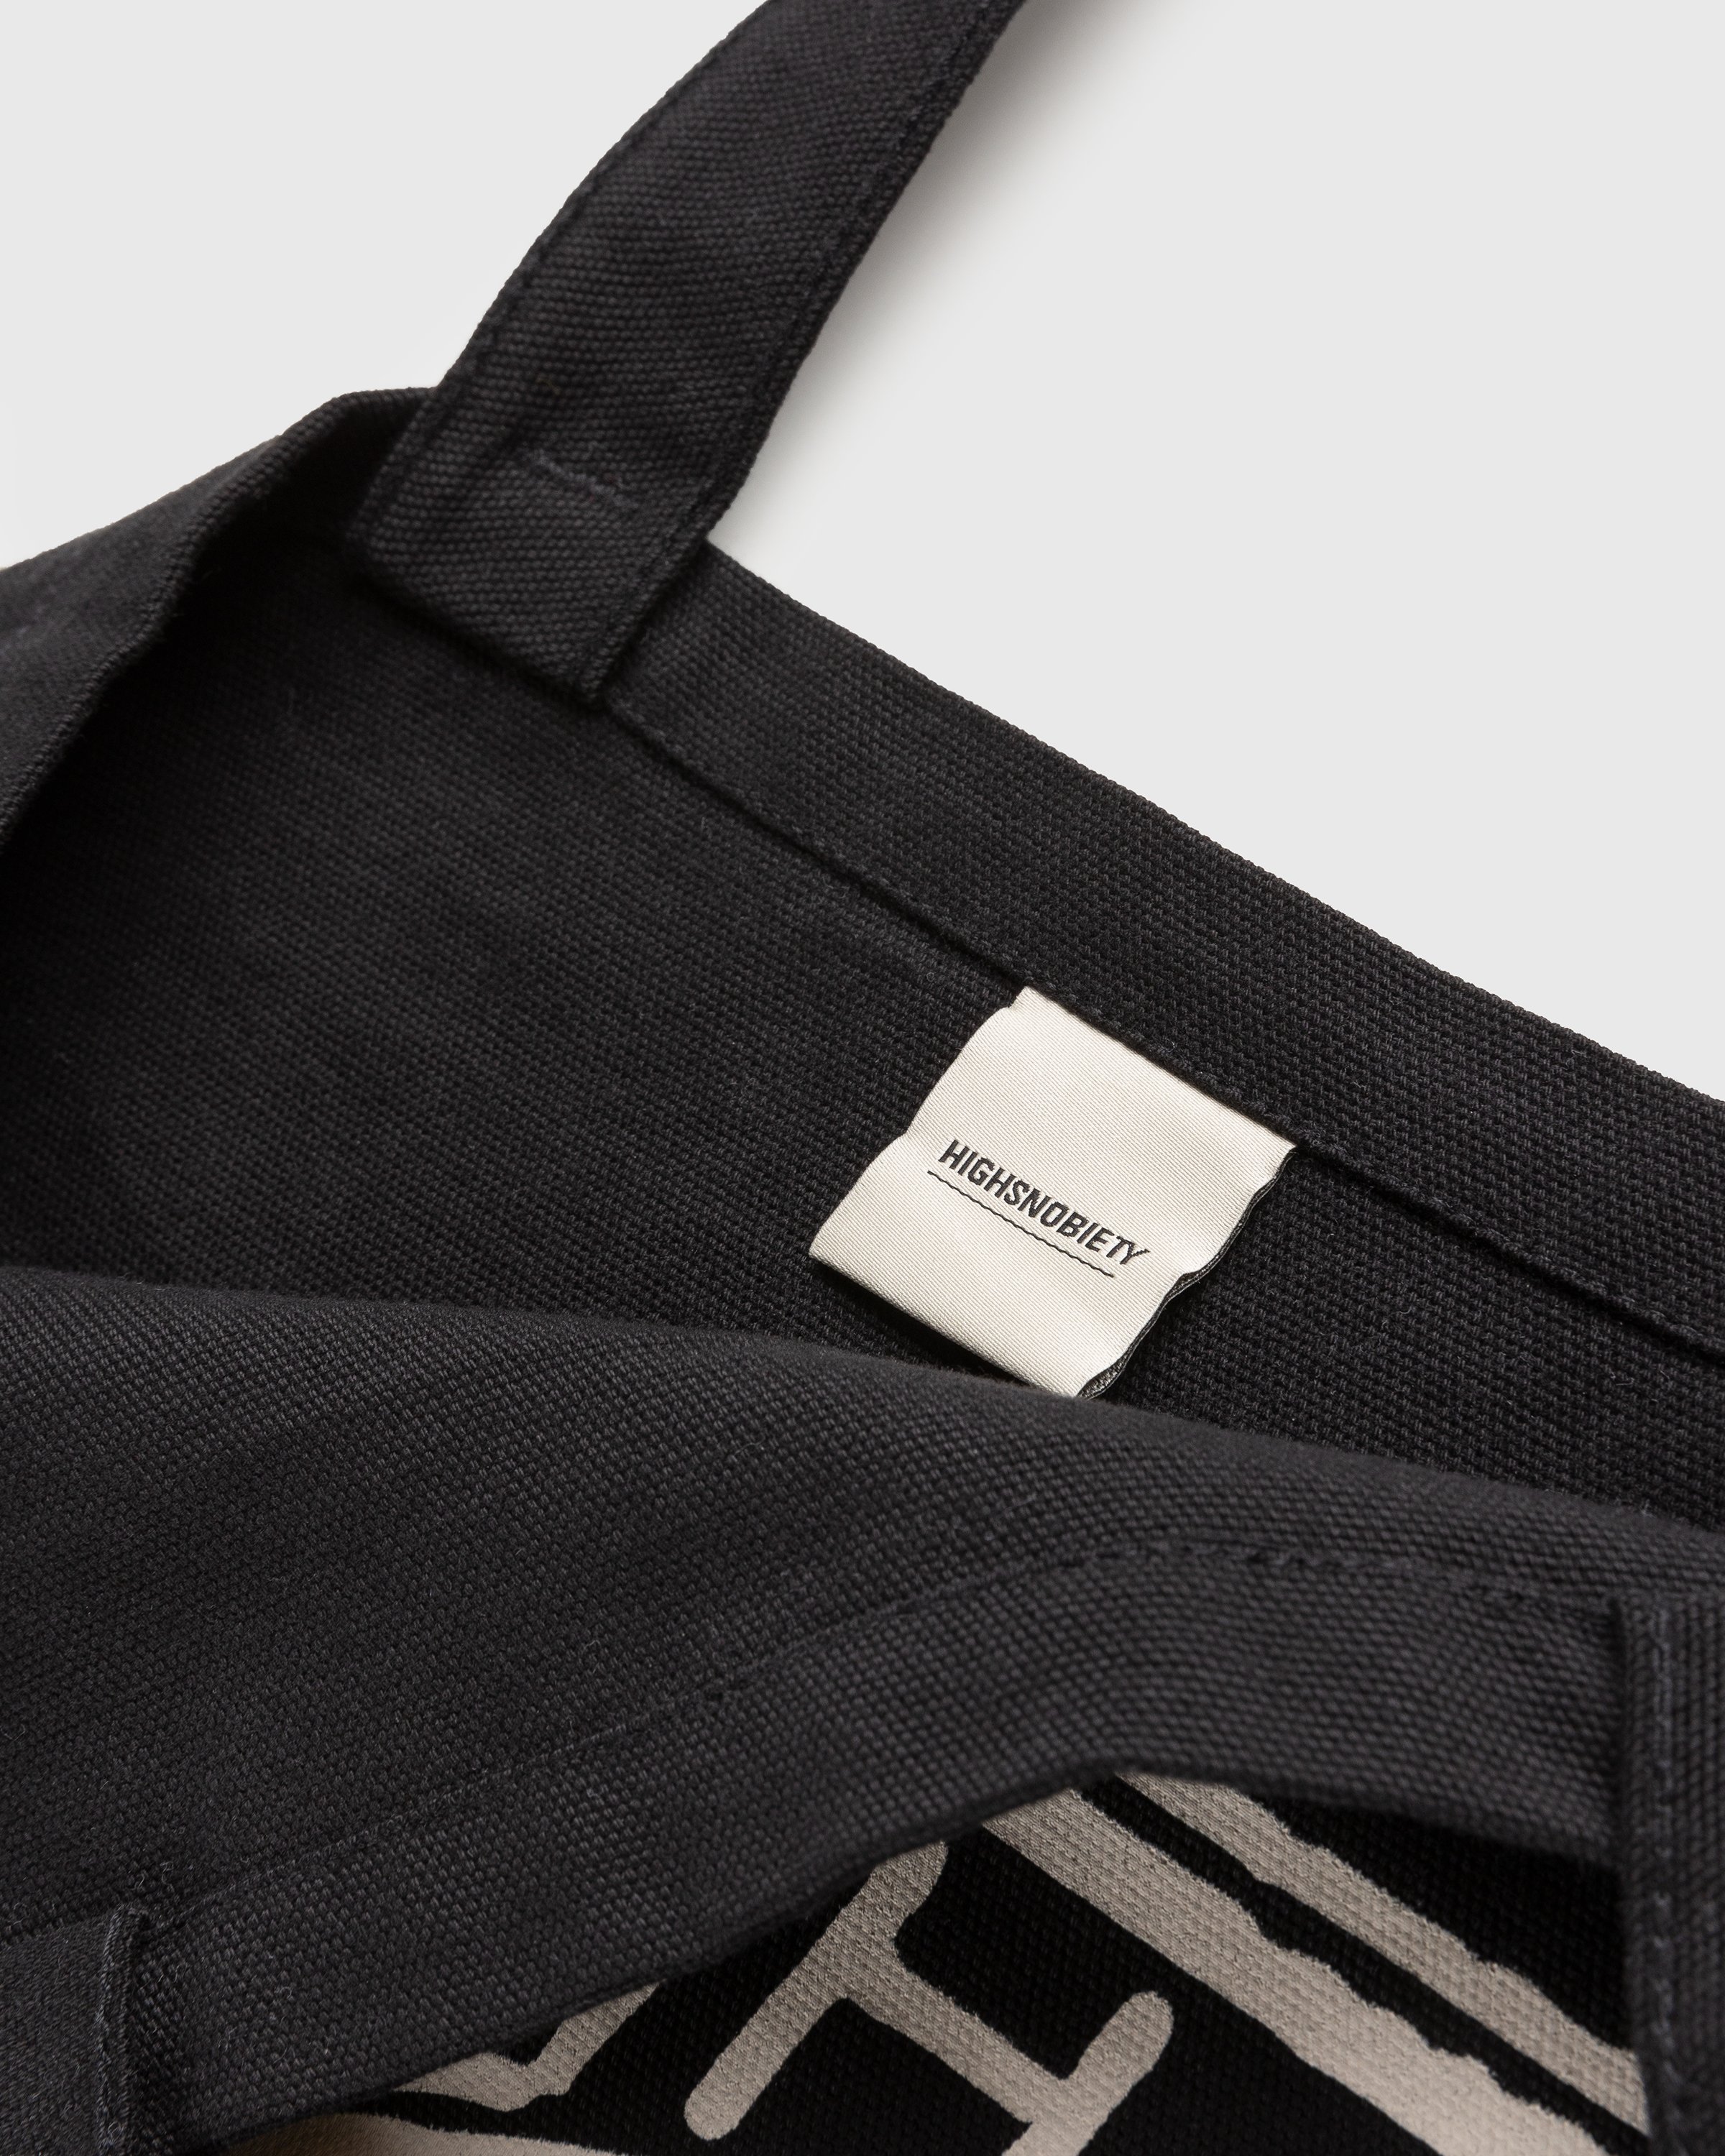 Hotel Amour x Highsnobiety - Not In Paris 4 Tote Bag Black - Accessories - Black - Image 3